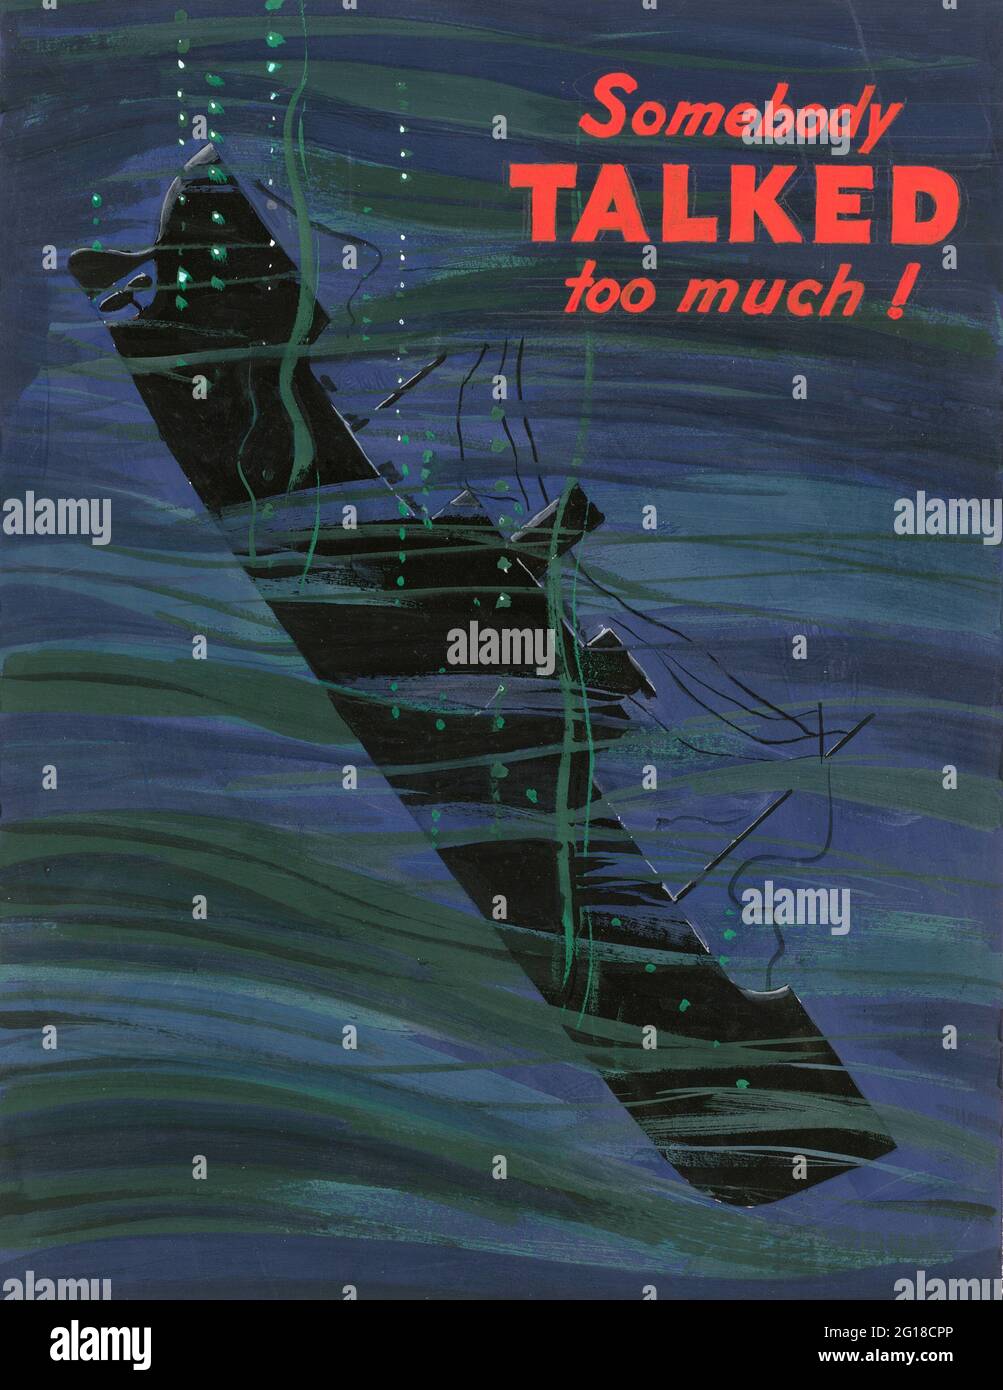 A vintage WW2 Allied poster raising awareness of careless talk costs lives, showing an a sinking ship with the slogan Somebody Talked Too Much Stock Photo